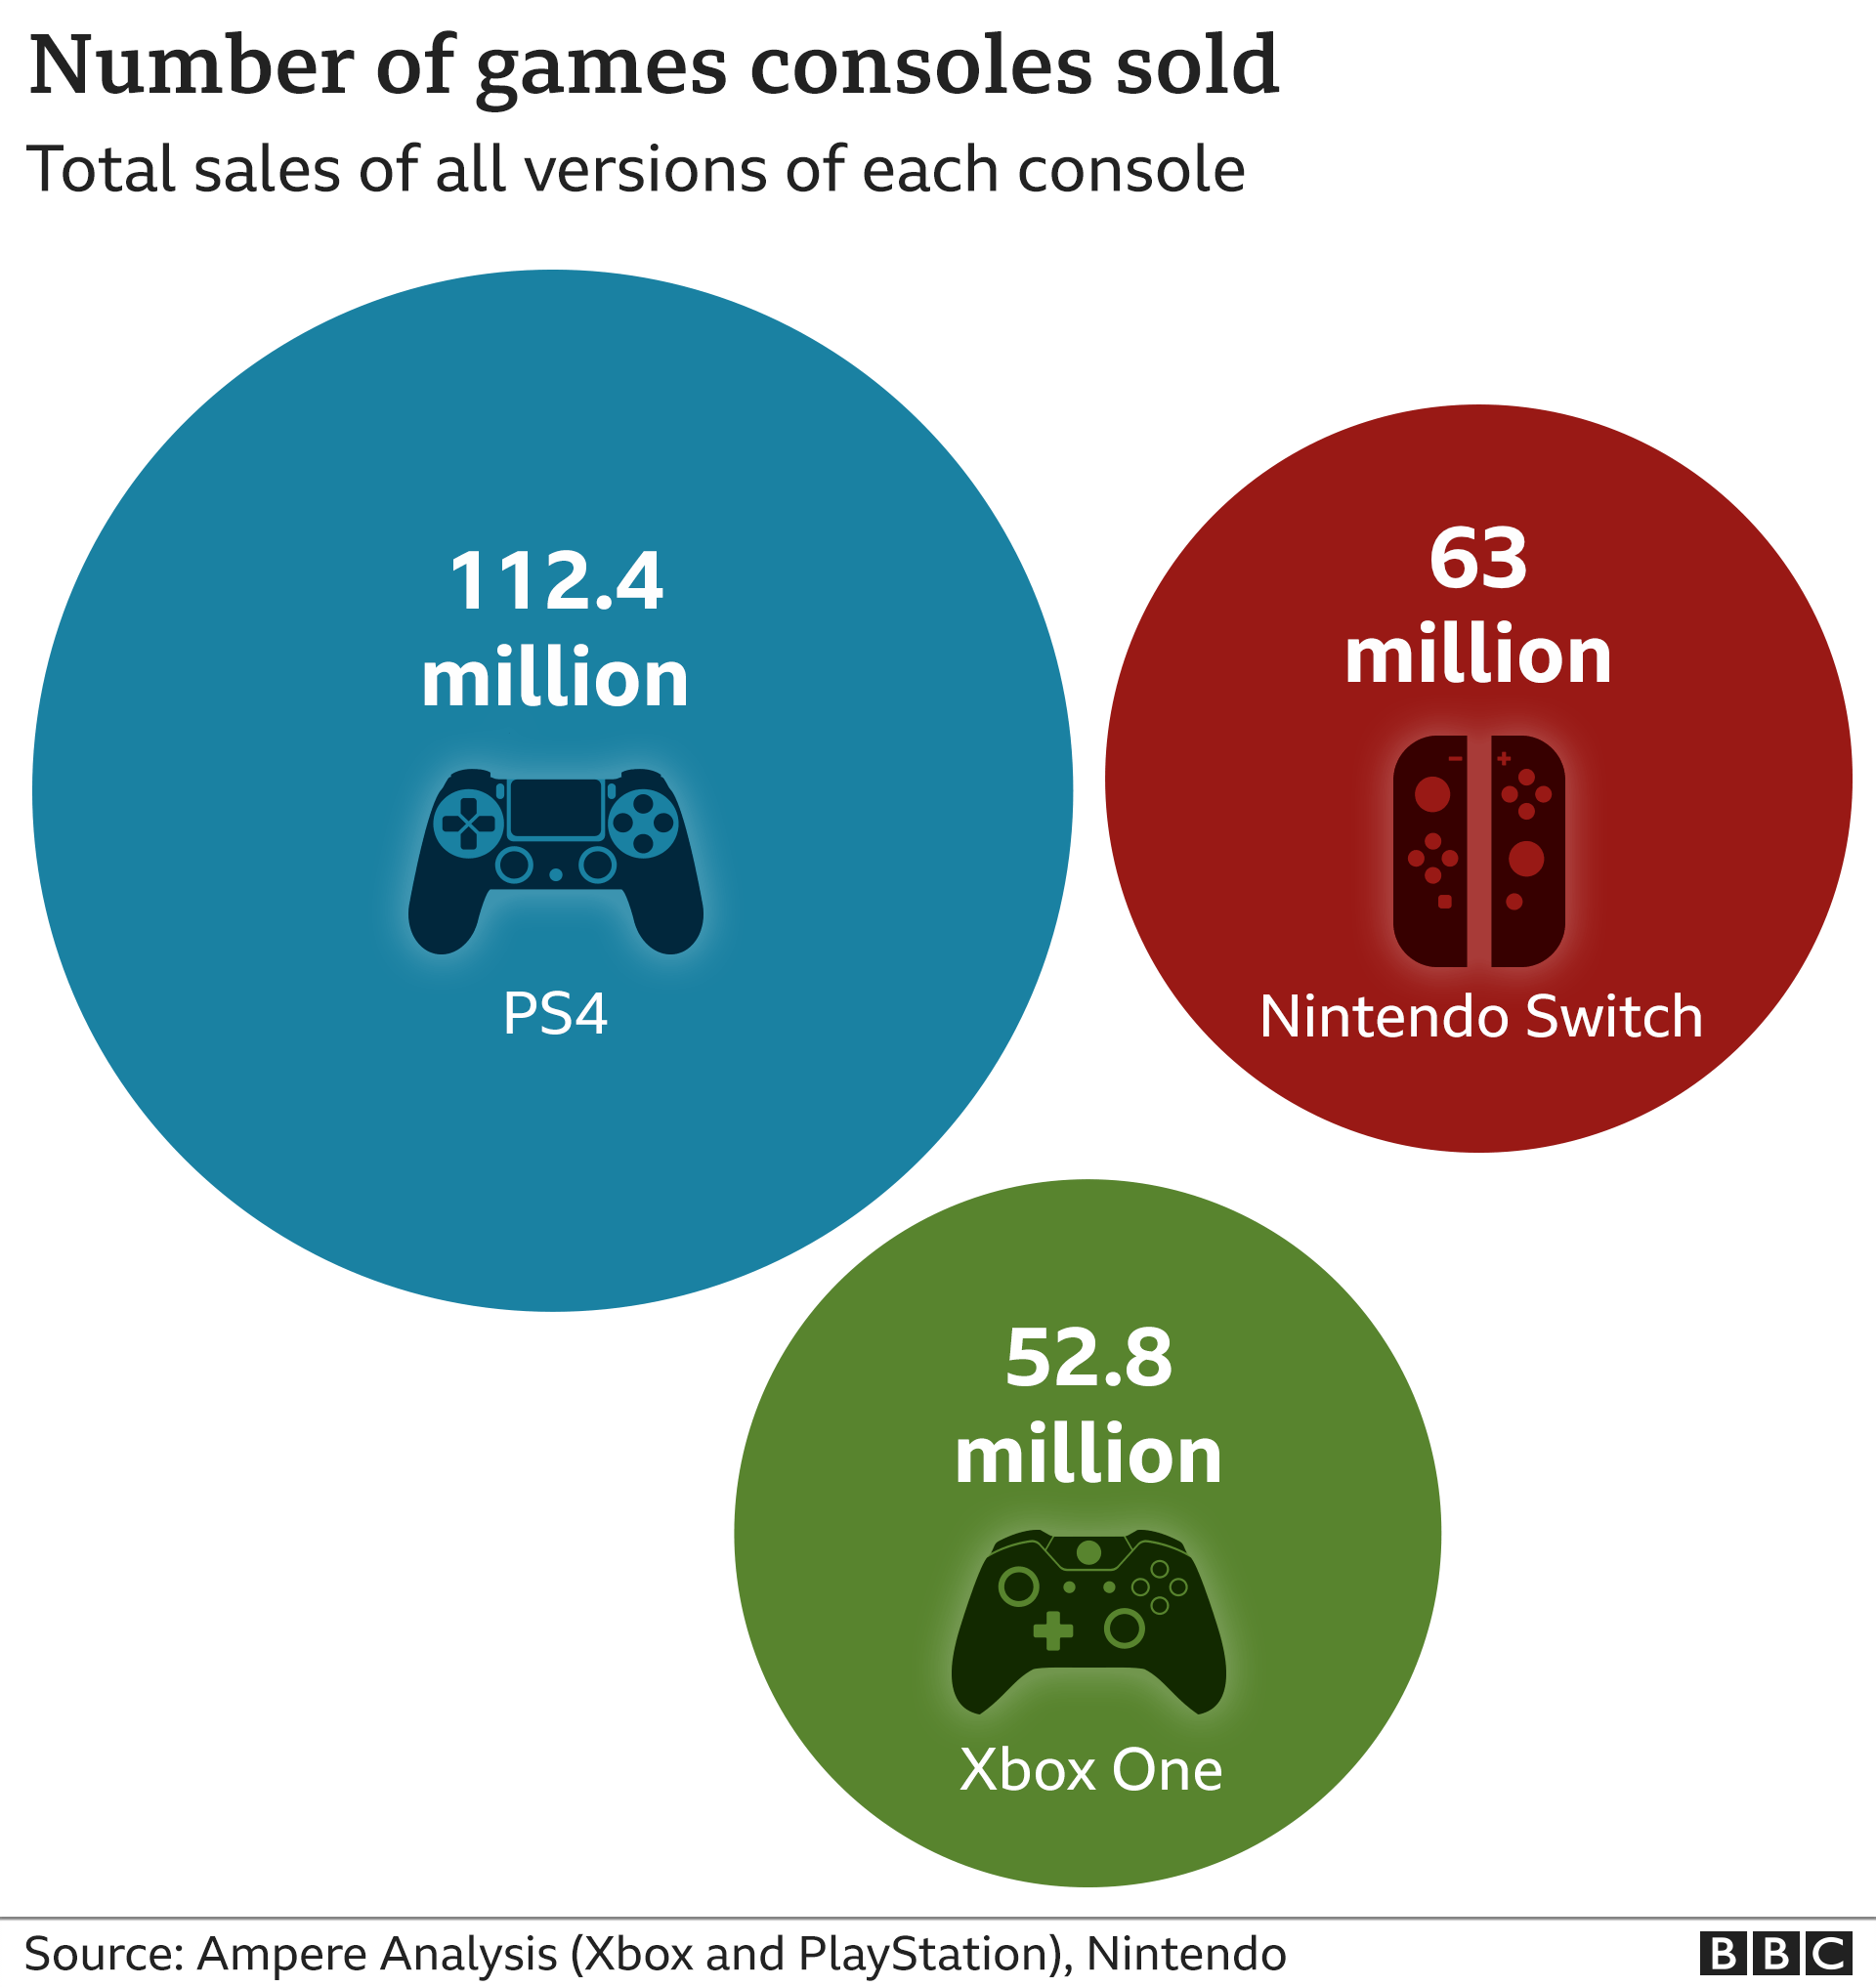 Sales of previous generation games consoles. PS4 - 112.4 million. Xbox One - 52.8 million. (Source: Ampere Analysis) Nintendo Switch - 63 million. (Source Nintendo).